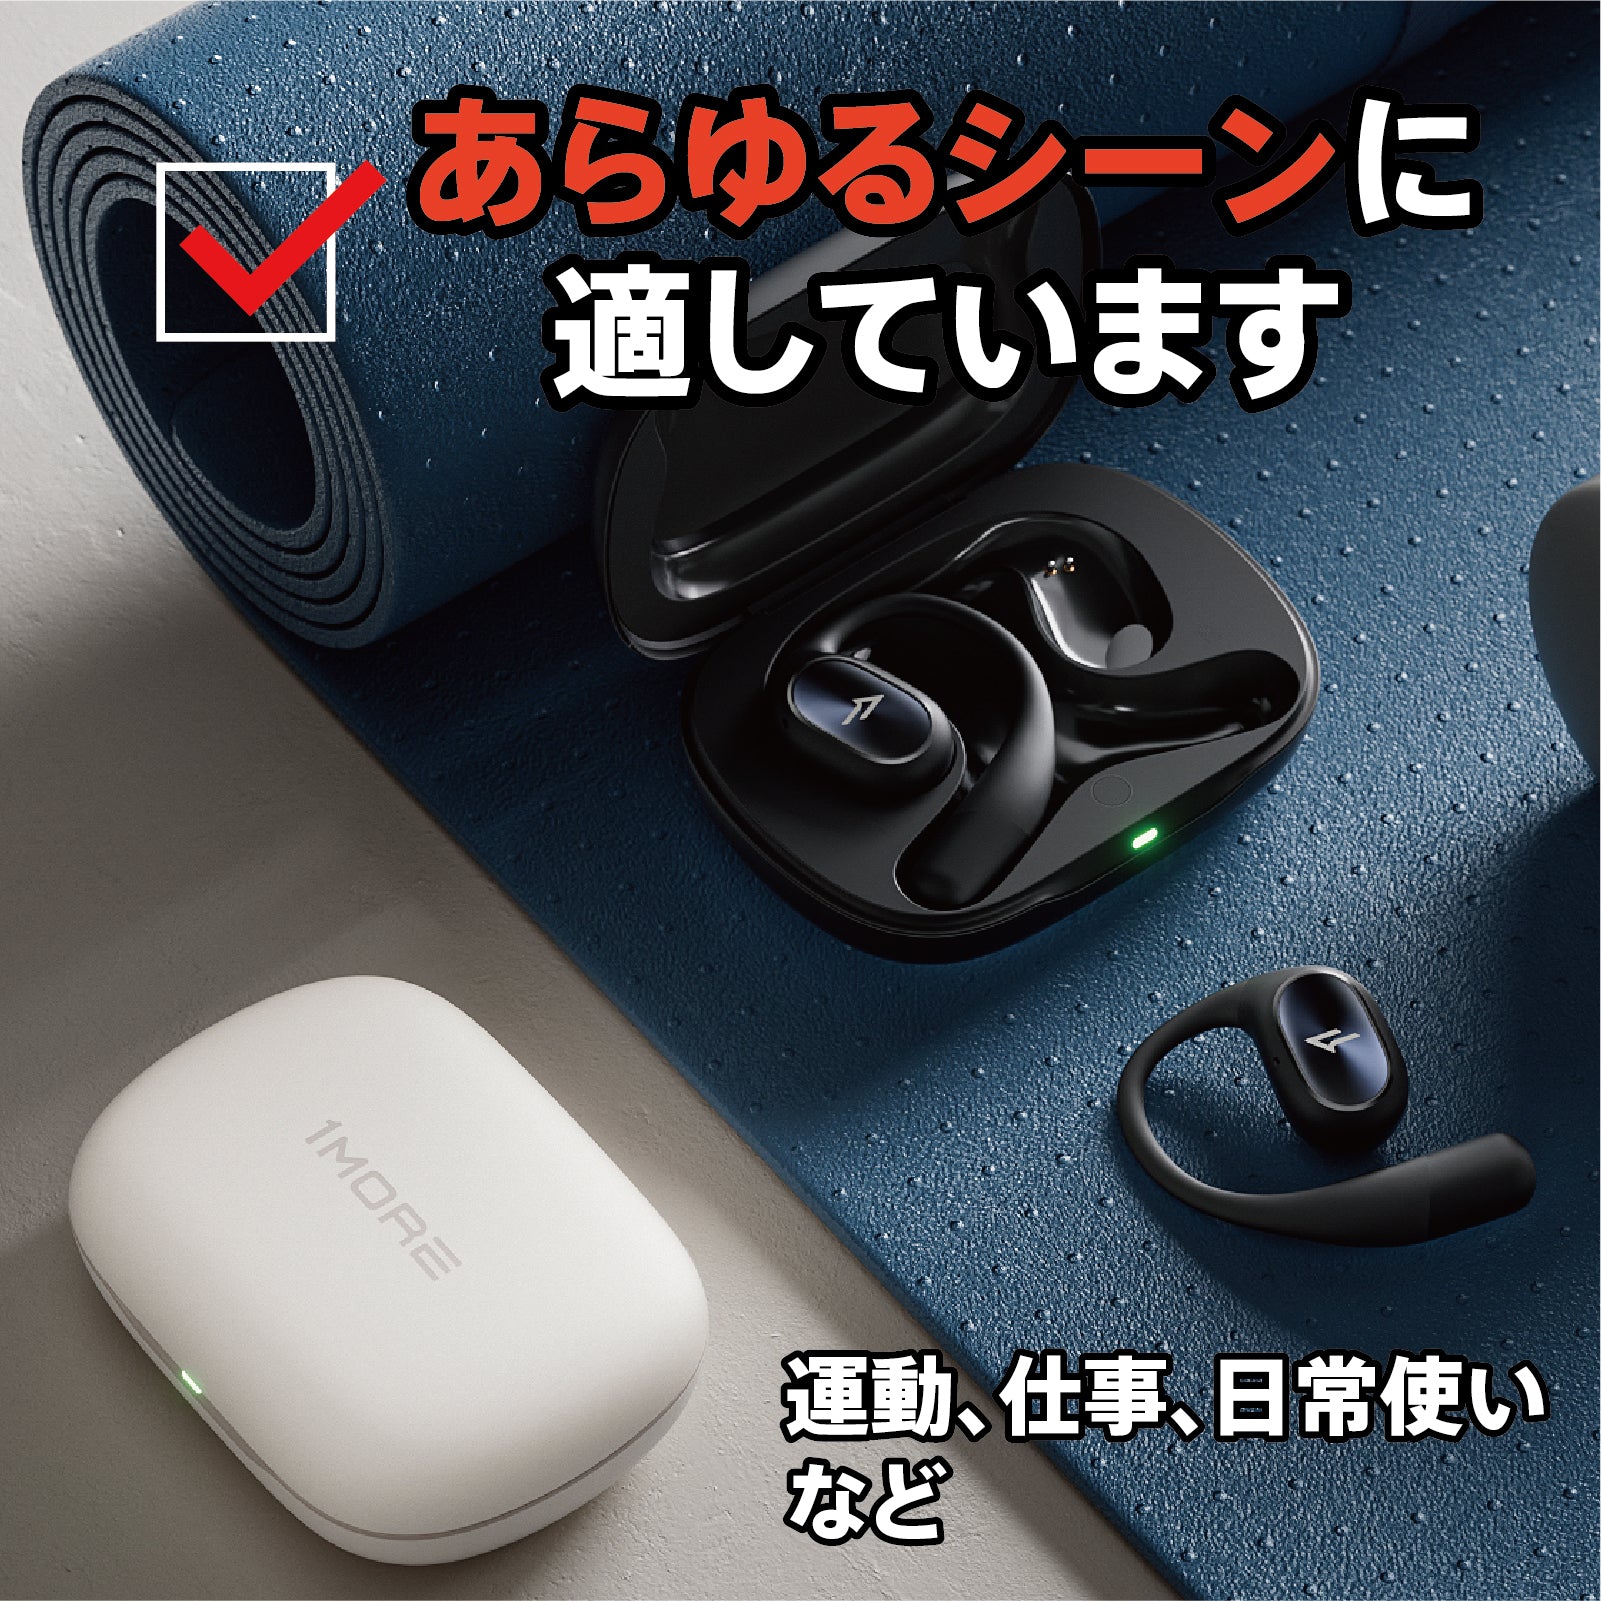 【15％OFF】1MORE Open Earbuds S31 オープンイヤーイヤホン